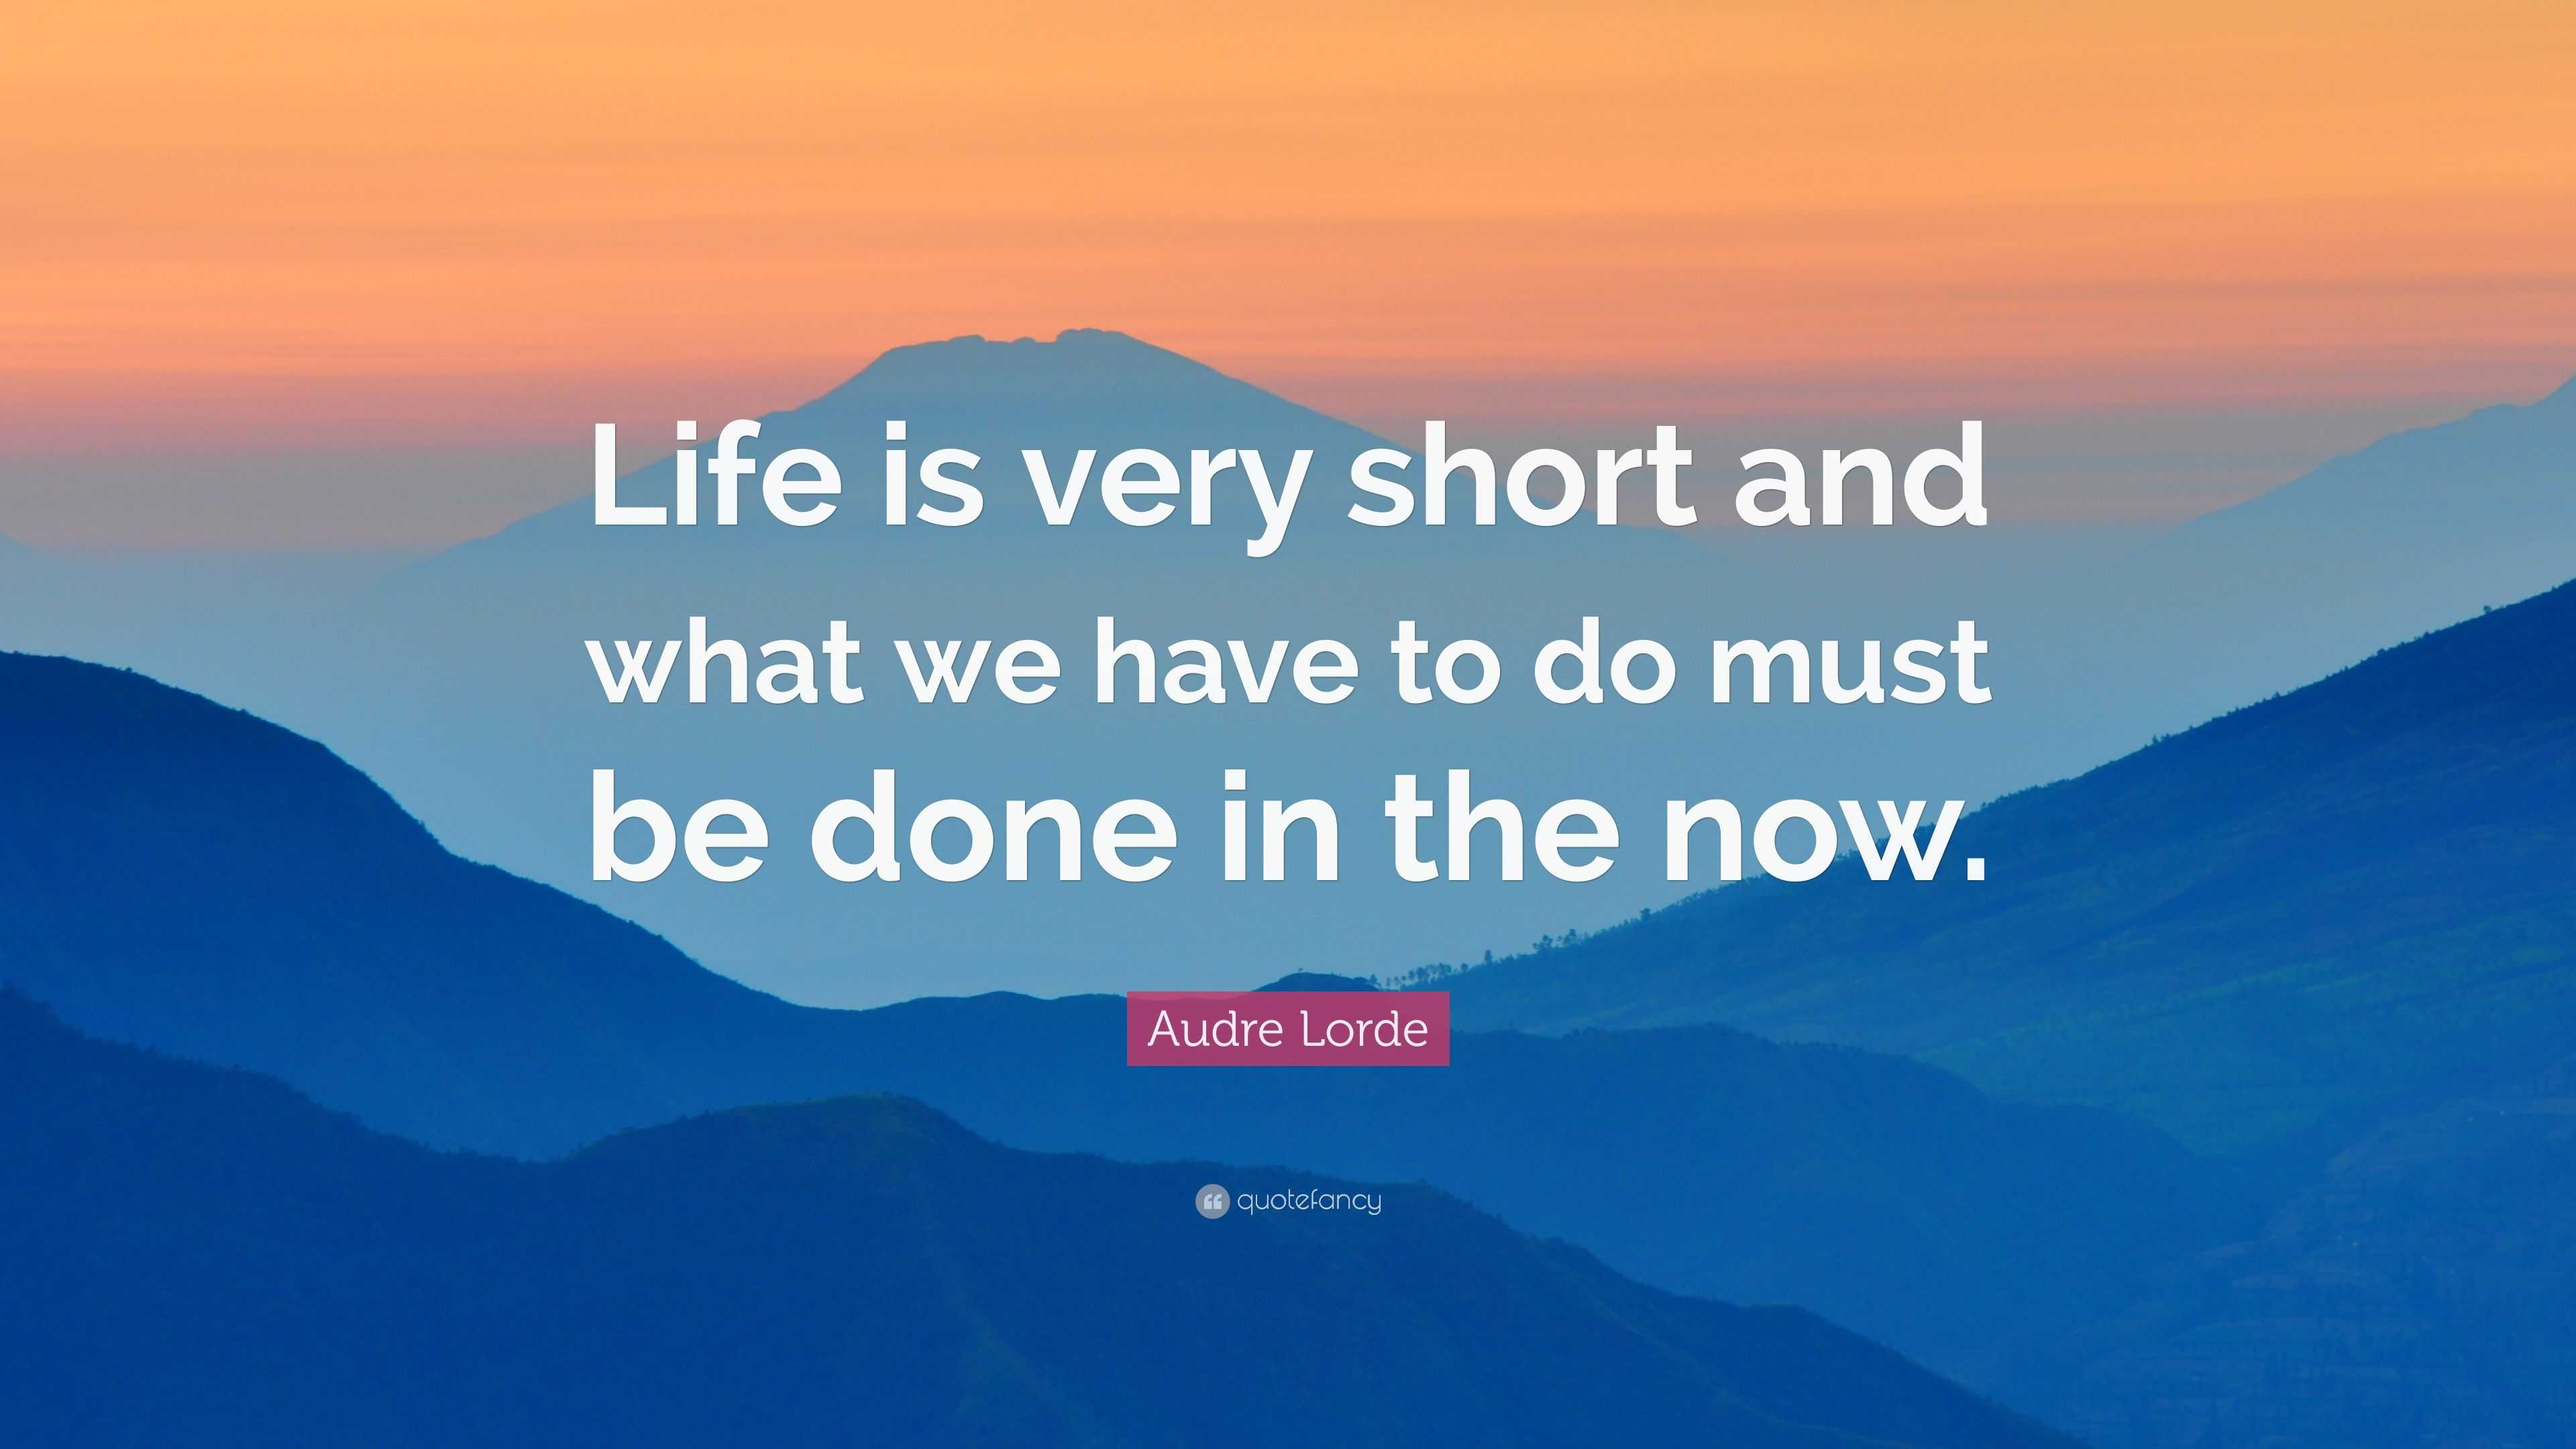 Audre Lorde Quote: “Life is very short and what we have to do must be ...